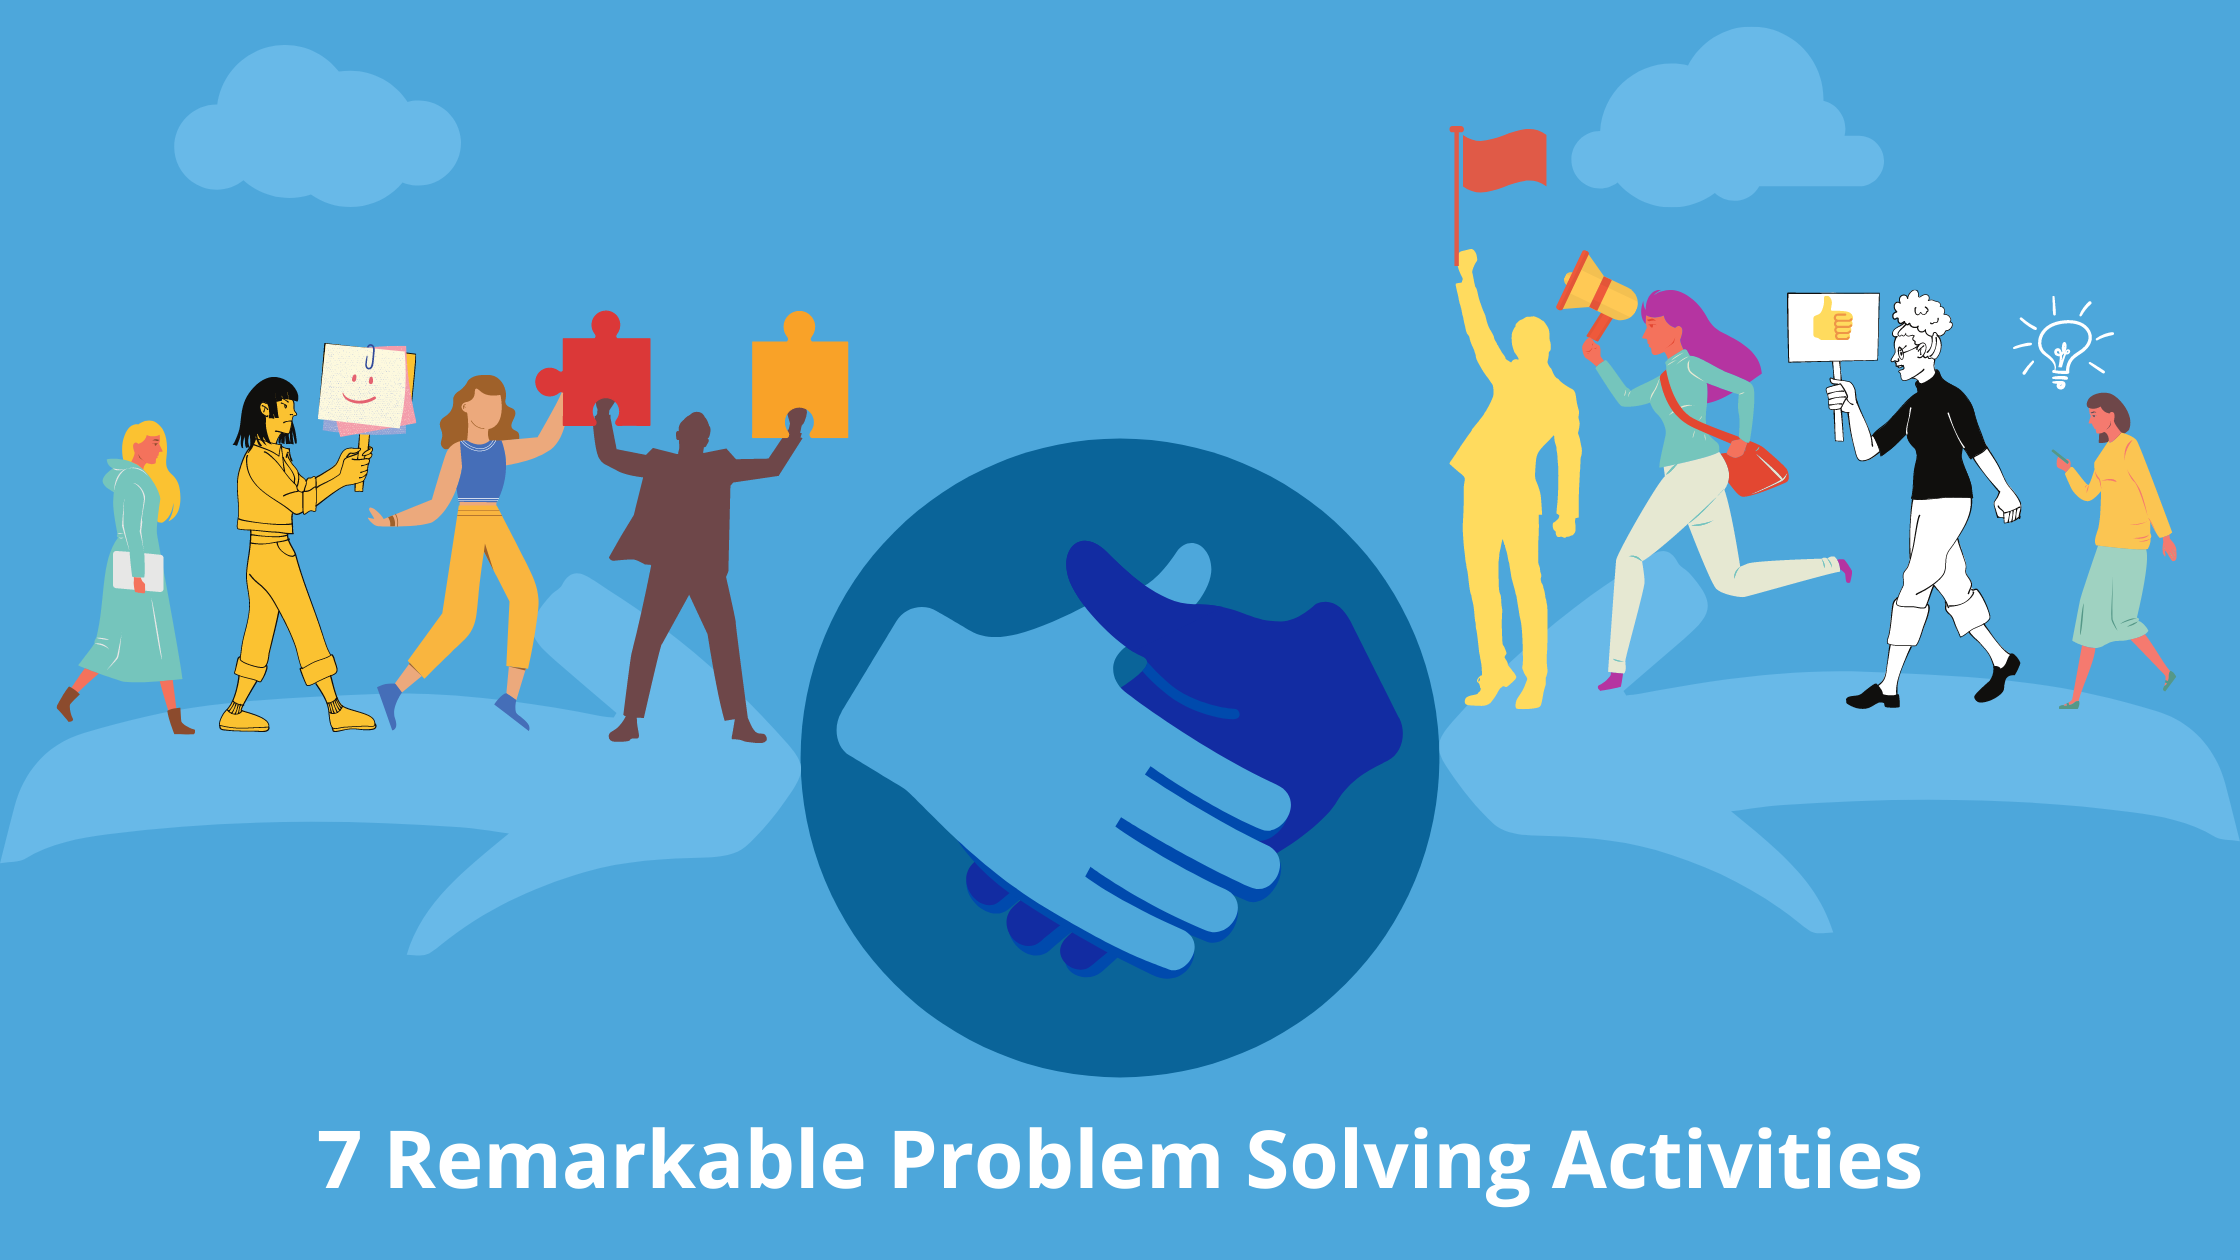 7 Easy Problem Solving Activities – How Your Team Benefits From Them